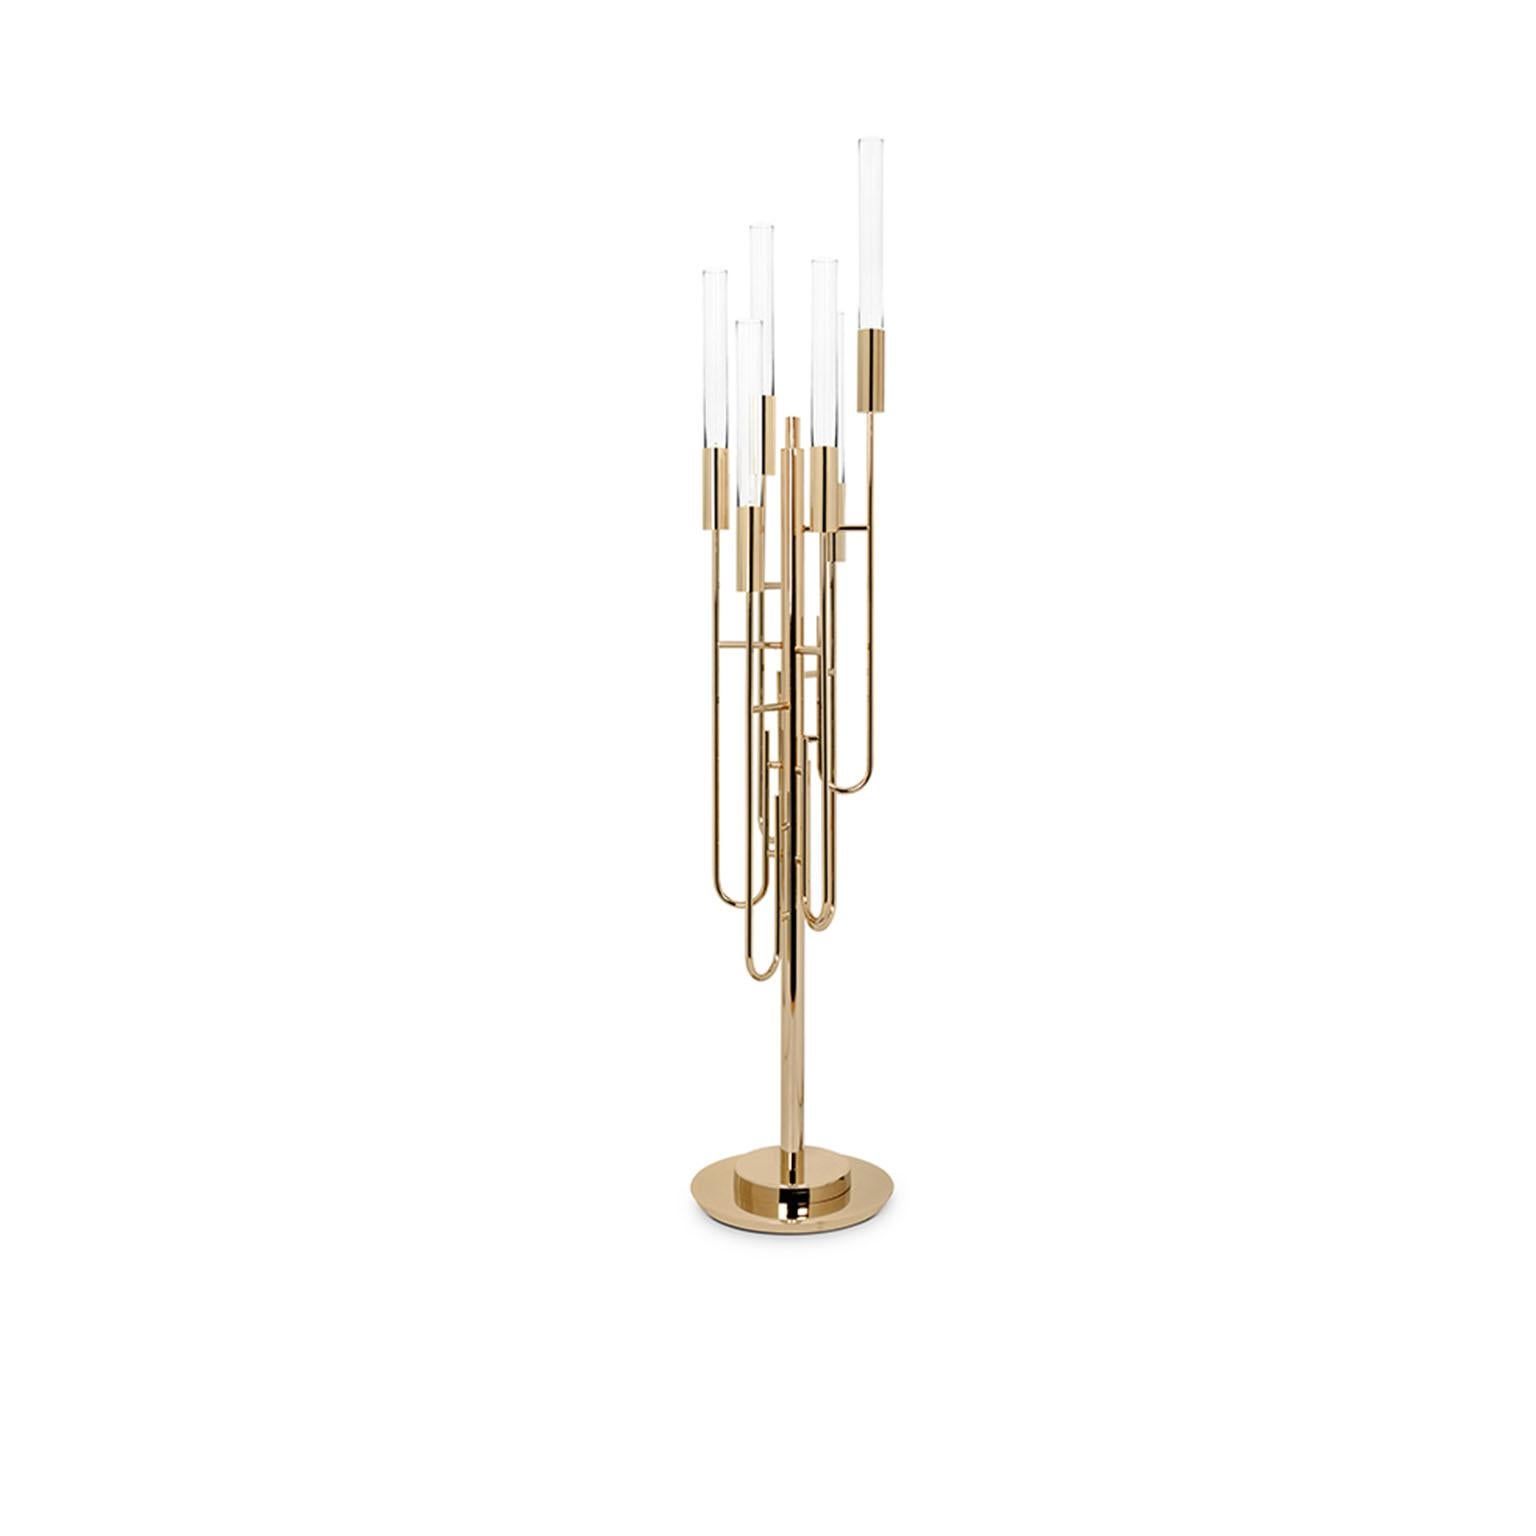 Allow yourself to fall for our unique Gala floor lamp elegantly made of gold plated brass and crystal glass. Our splendid floor lamp gets its inspiration in cheerful moments and intense design. It is the ideal contemporaneous shape to take a step